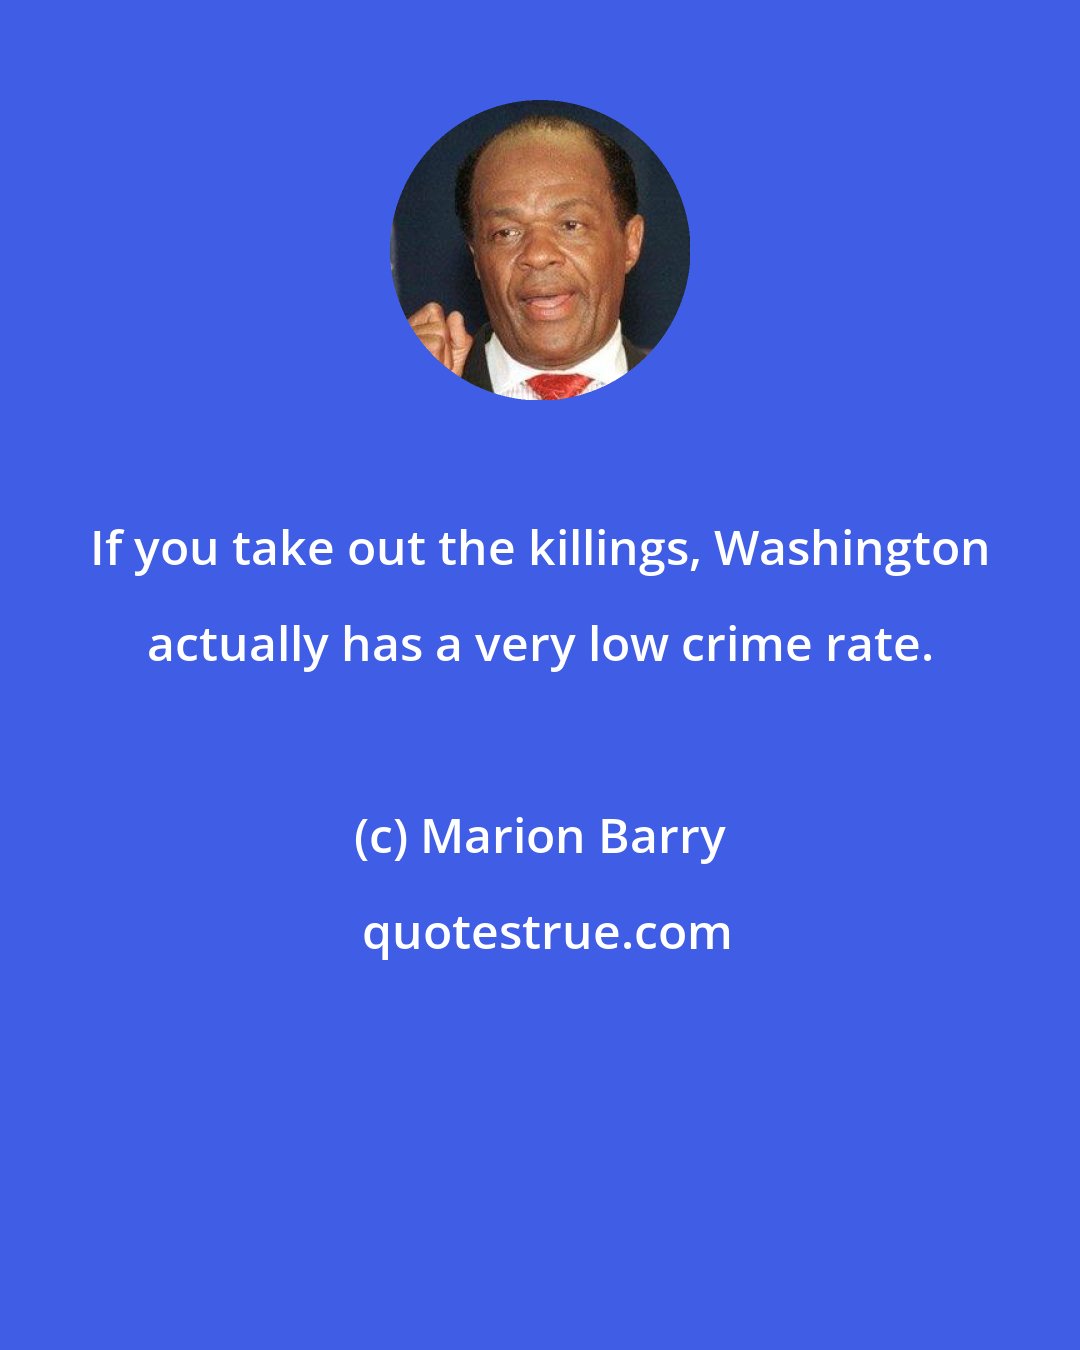 Marion Barry: If you take out the killings, Washington actually has a very low crime rate.